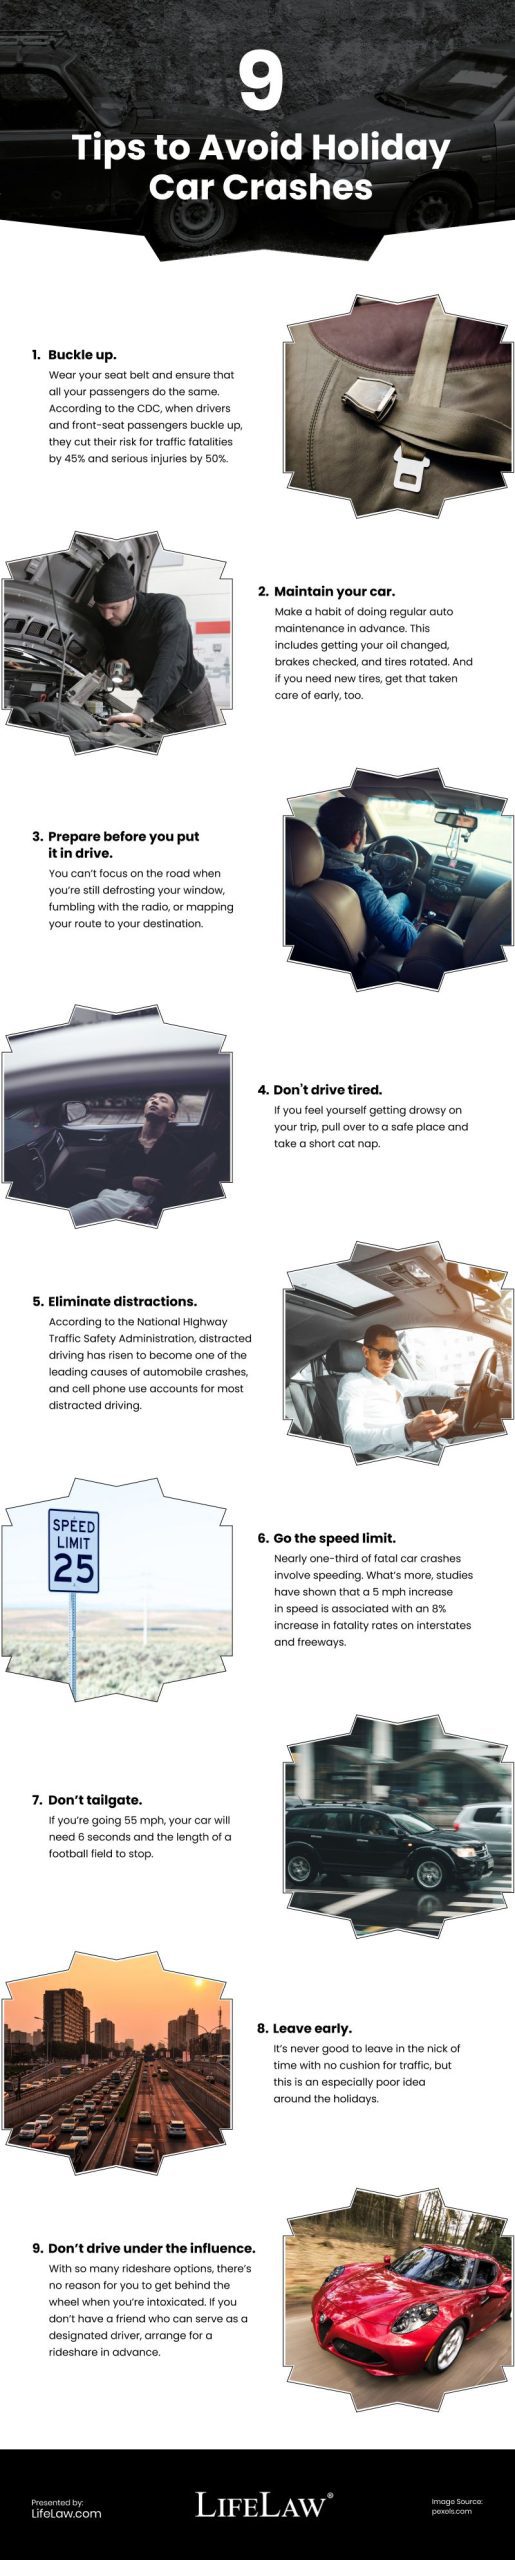 9 Tips to Avoid Holiday Car Crashes Infographic